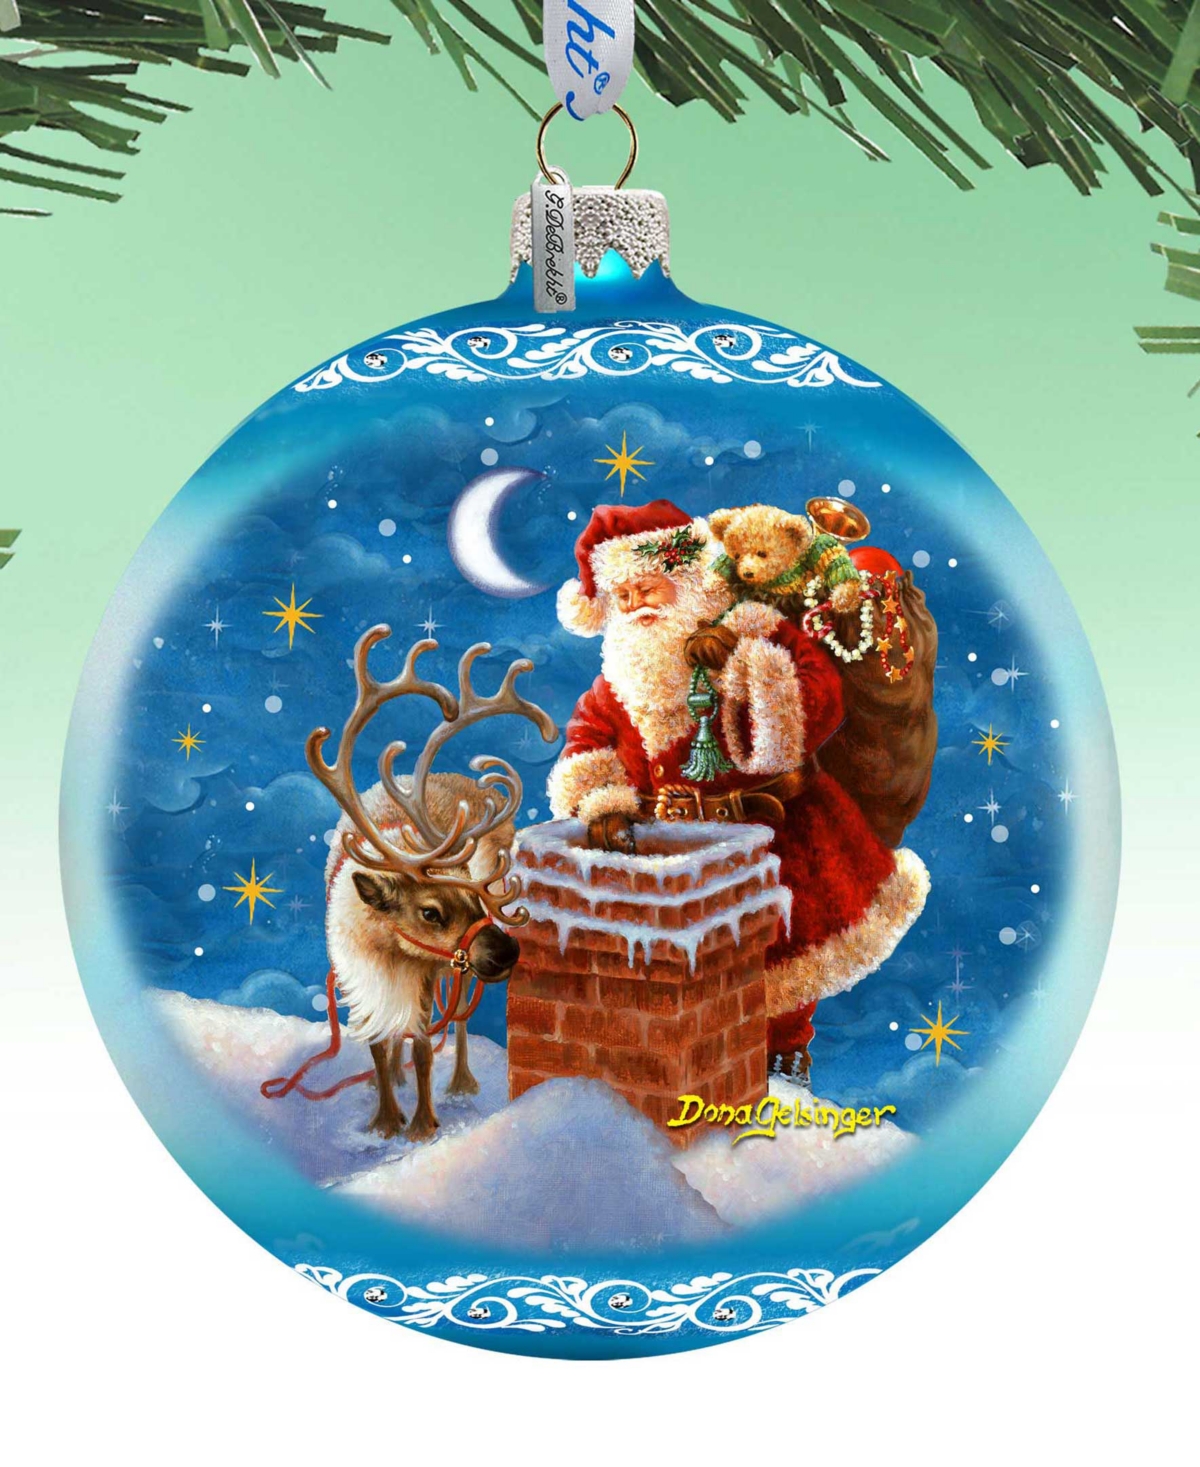 Designocracy Christmas Arrival Large Holiday Mercury Collectible Ornaments D. Gelsinger In Multi Color